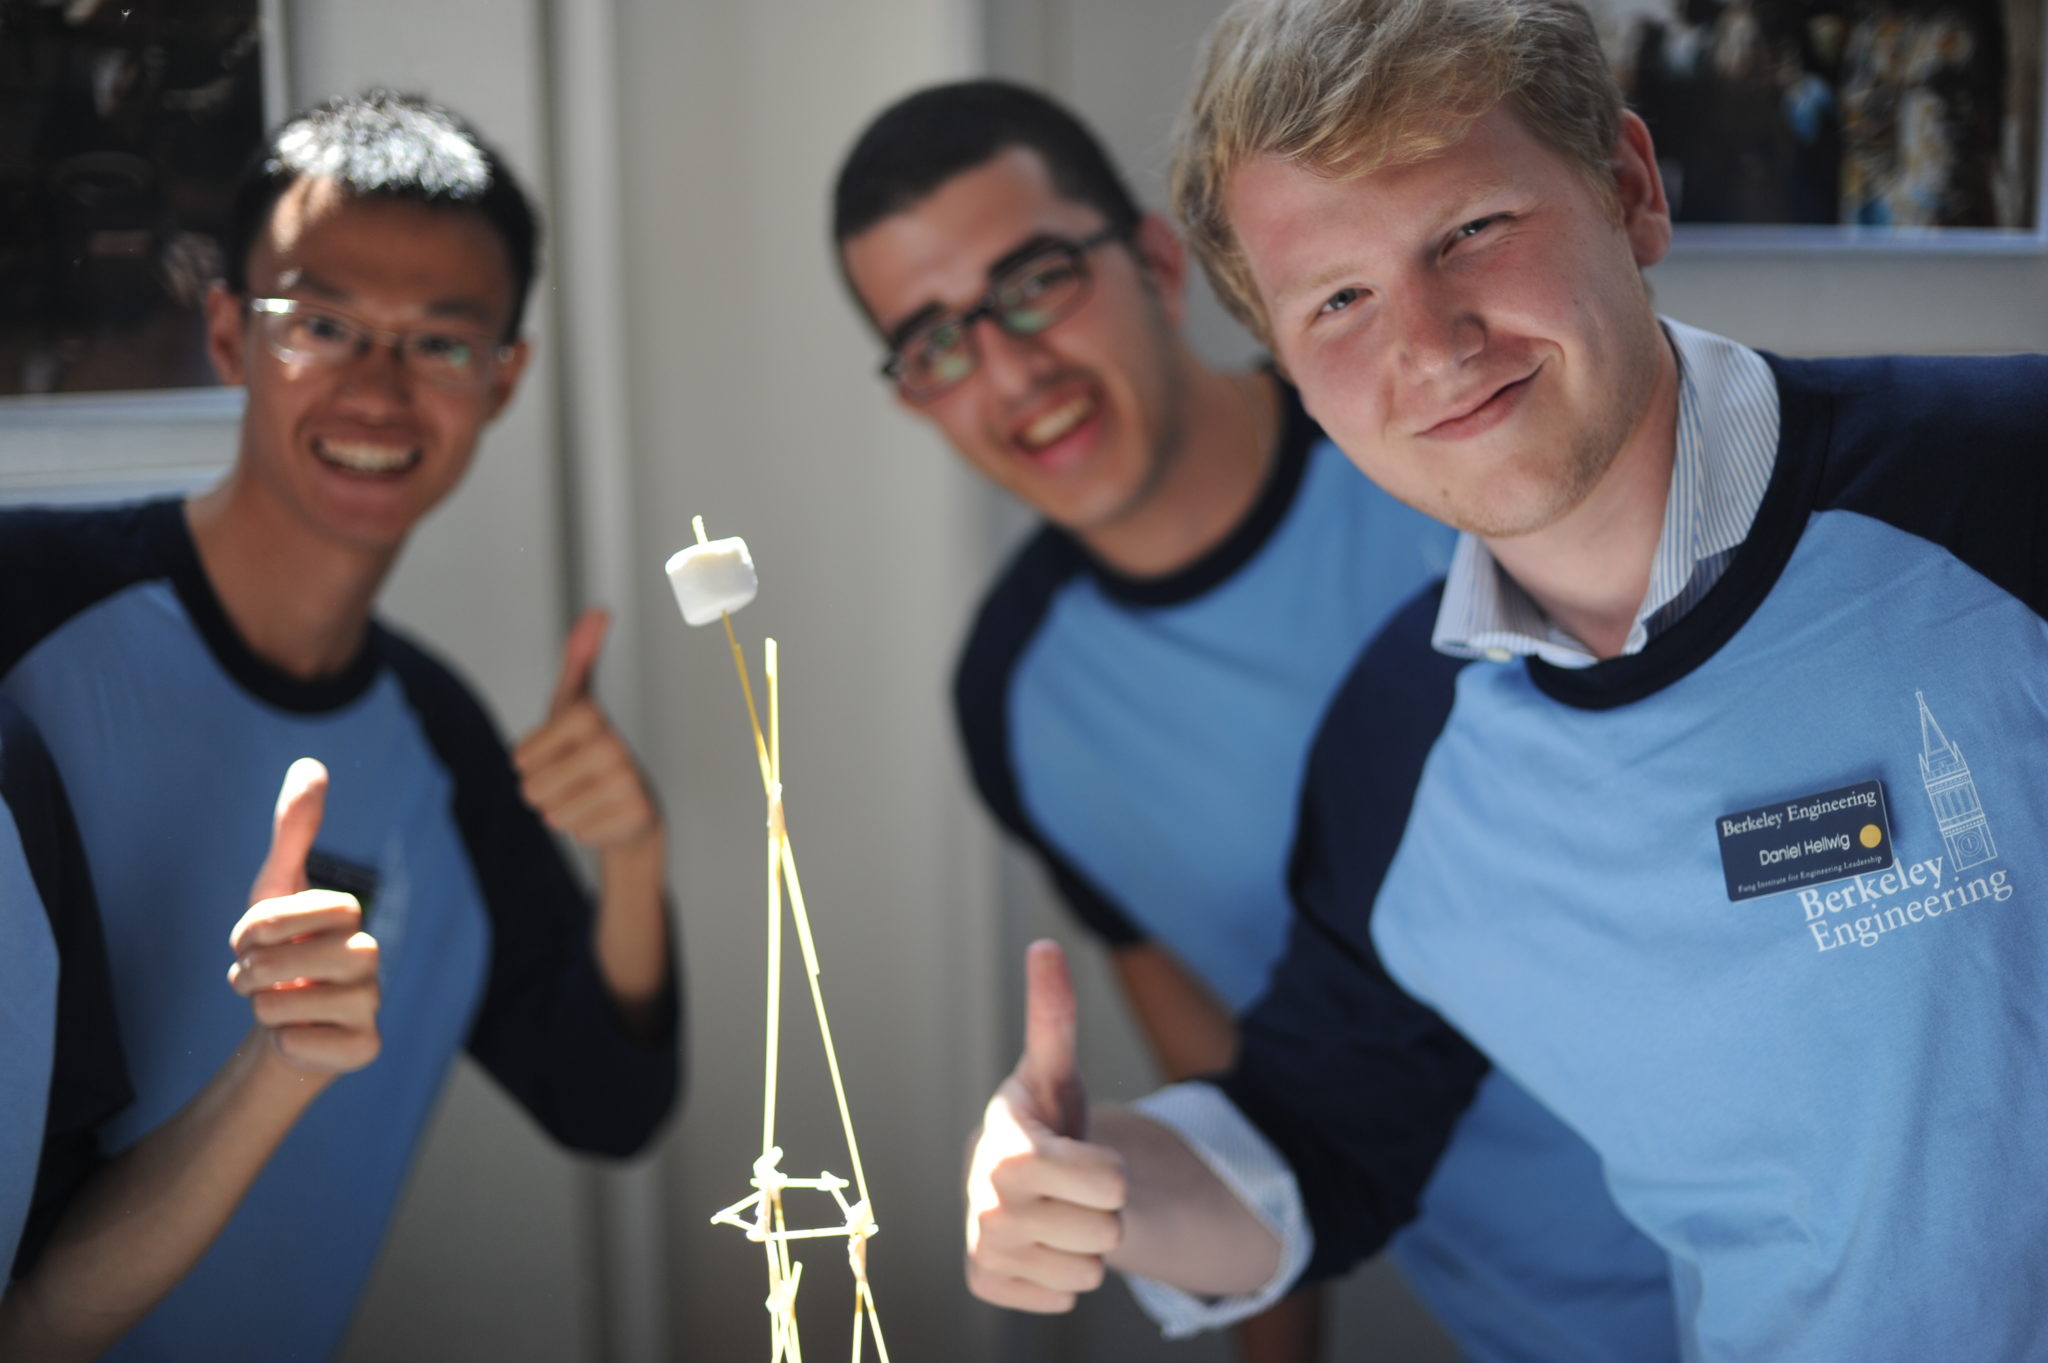 three young men in light blue shirts smile and give a thumbs up, standing next to a tower built out of spaghetti, holding up one marshmallow